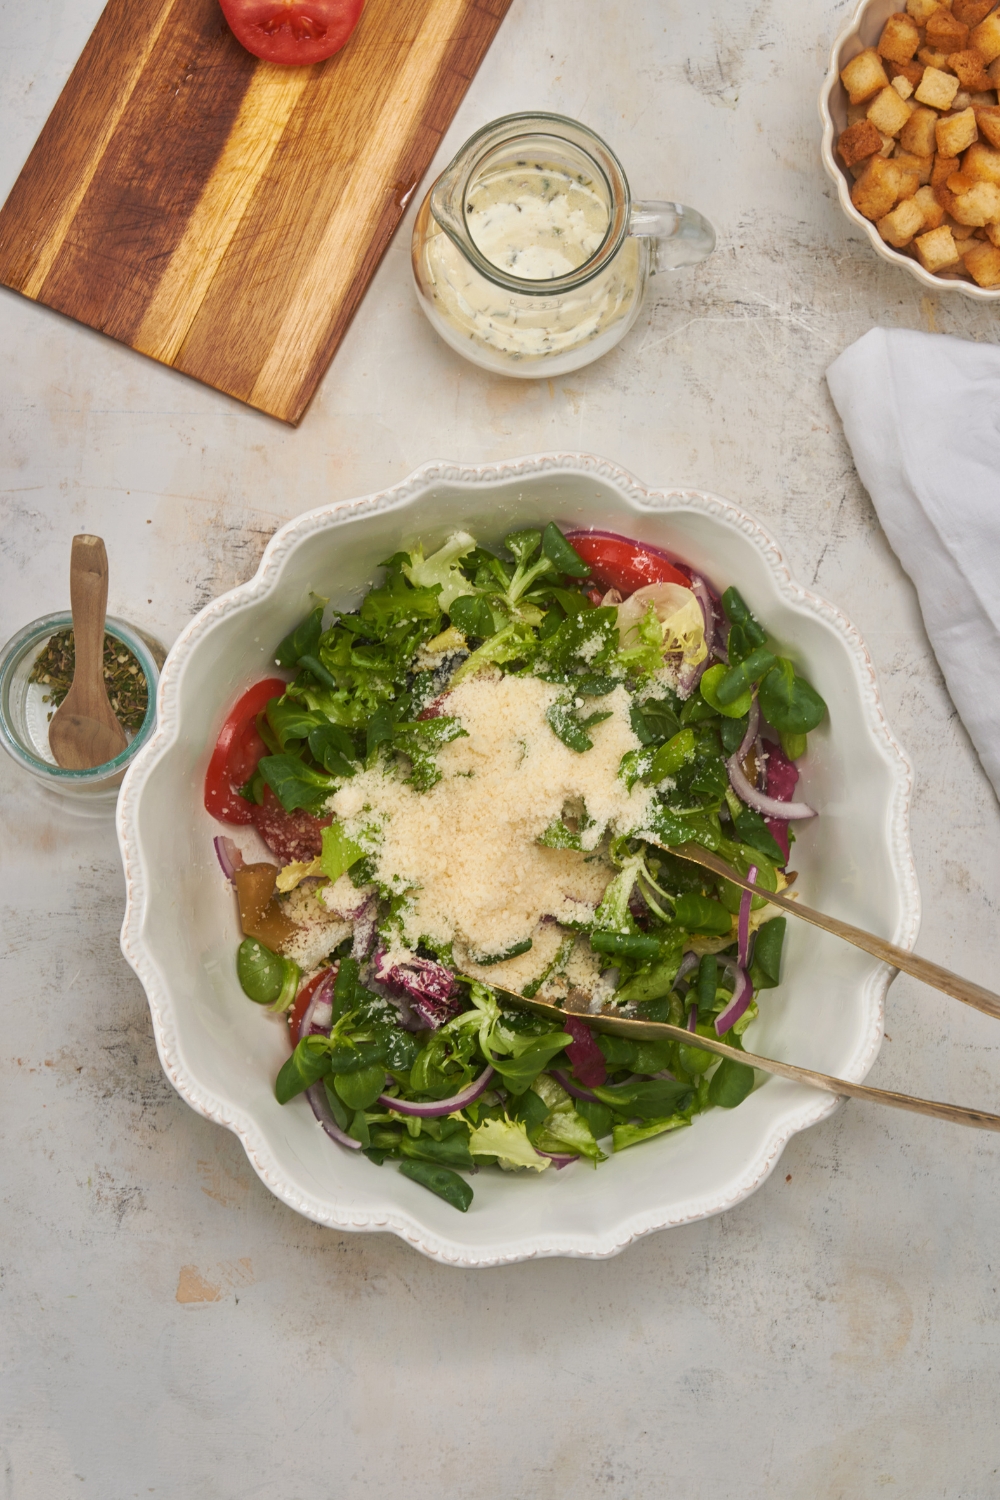 A large white bowl filled with lettuce, tomatoes, onions, grated parmesan cheese and a set of tongs.